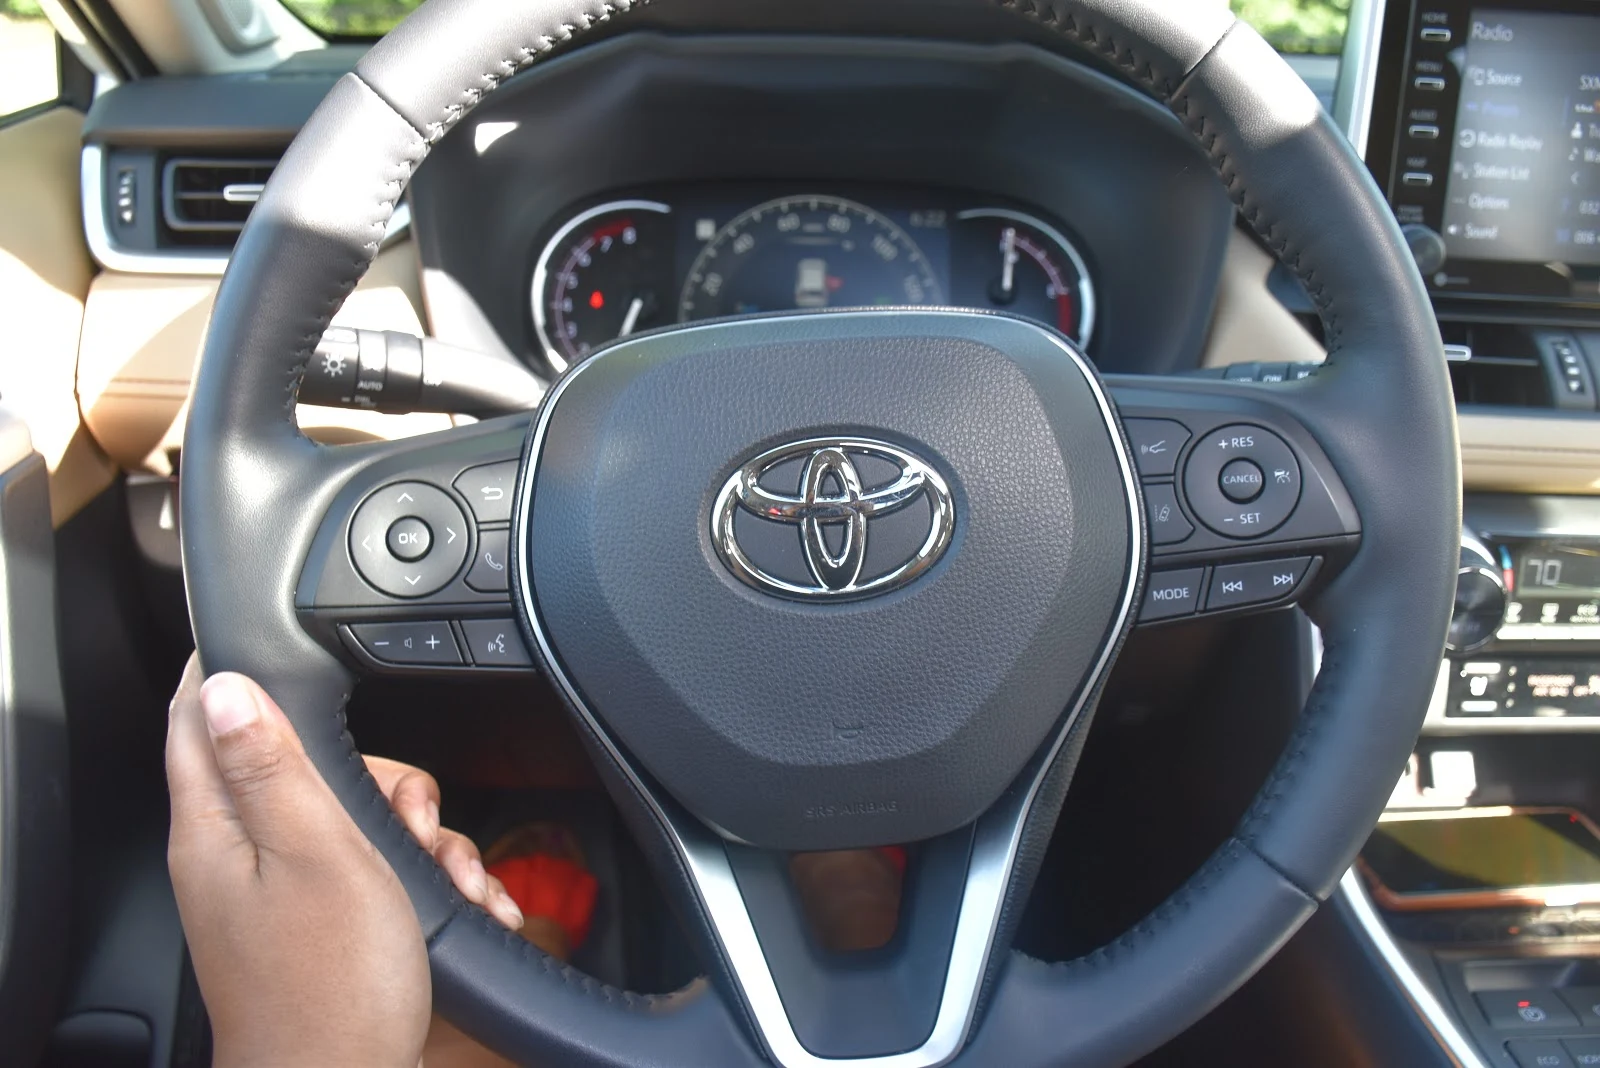 Video: Go on a Thrilling Adventure with the All-New 2019 Toyota RAV4